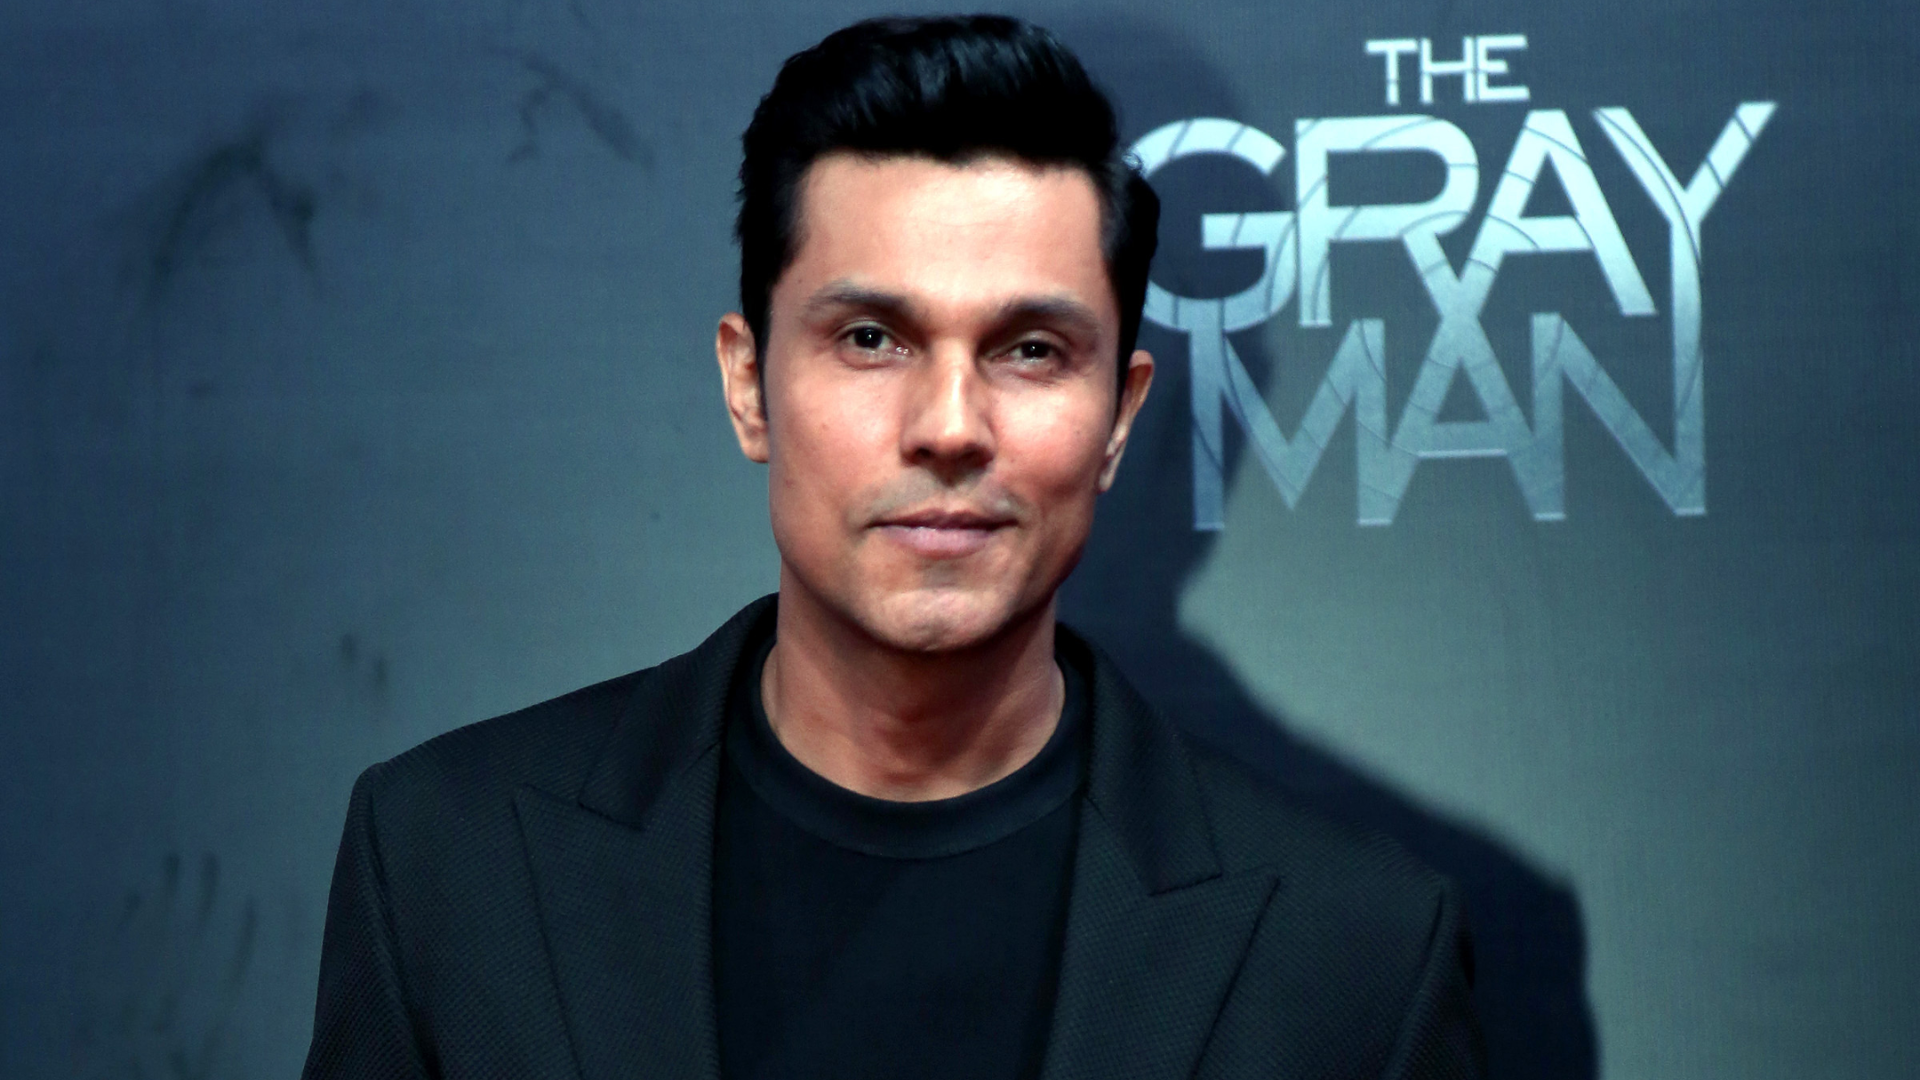 Randeep Hooda All Set To Contest Lok Sabha Elections As A BJP Candidate From Rohtak: Reports